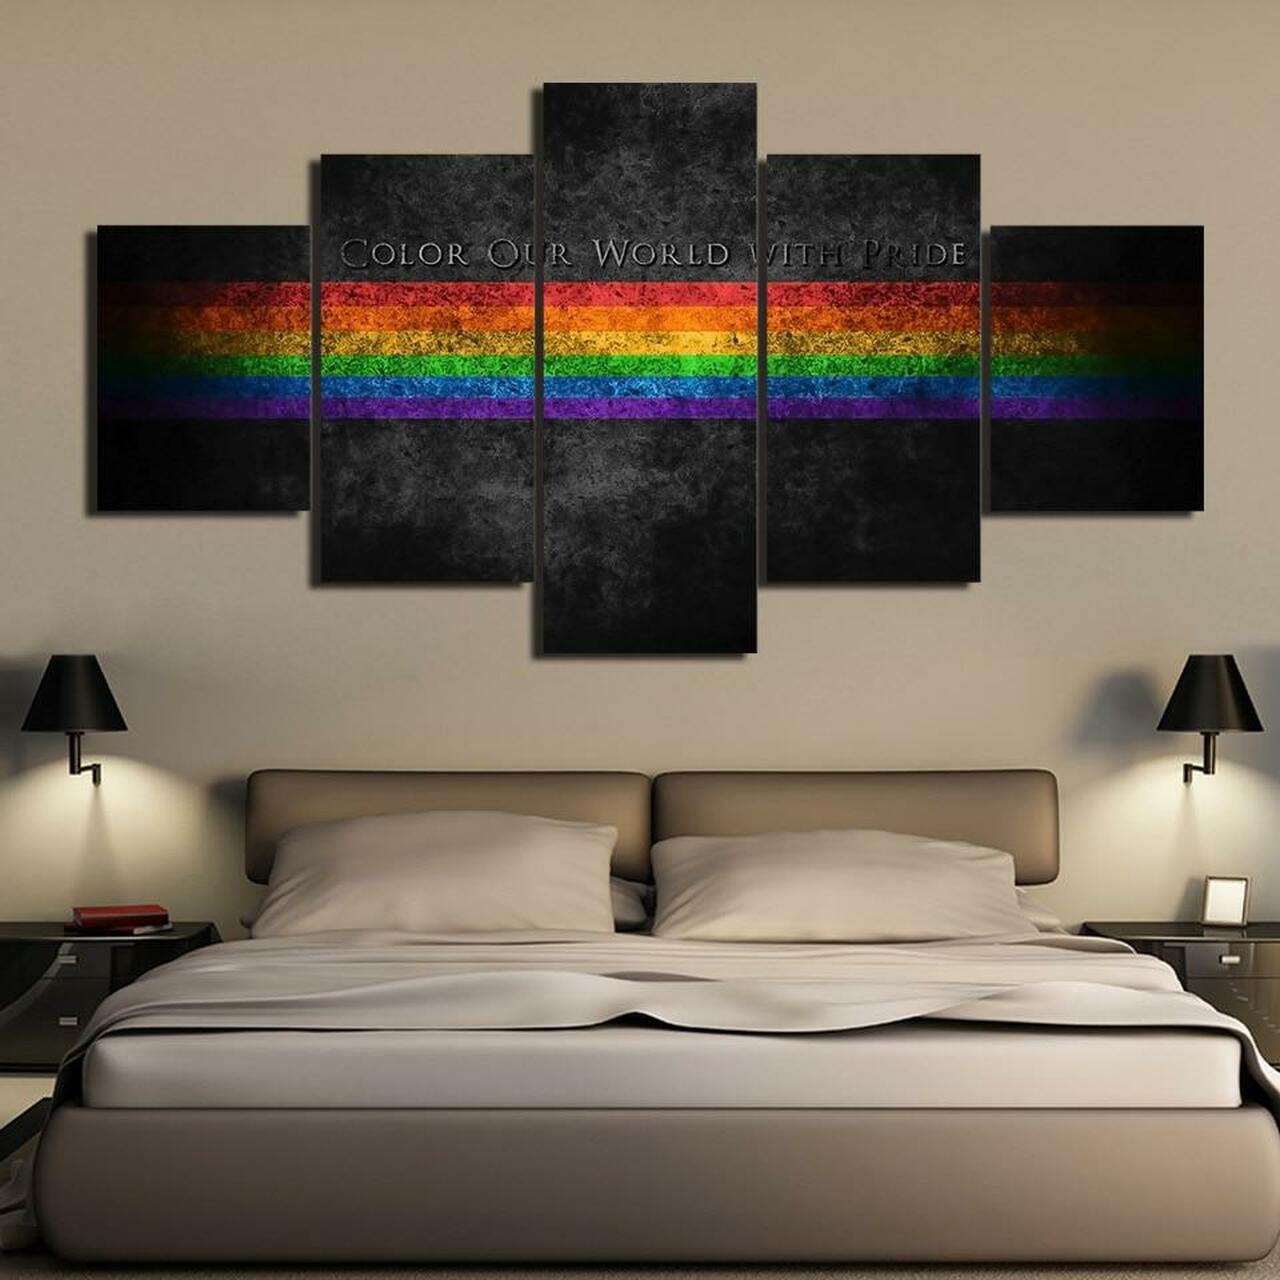 Color Our World With Pride 5 Piece Canvas Art Wall Decor